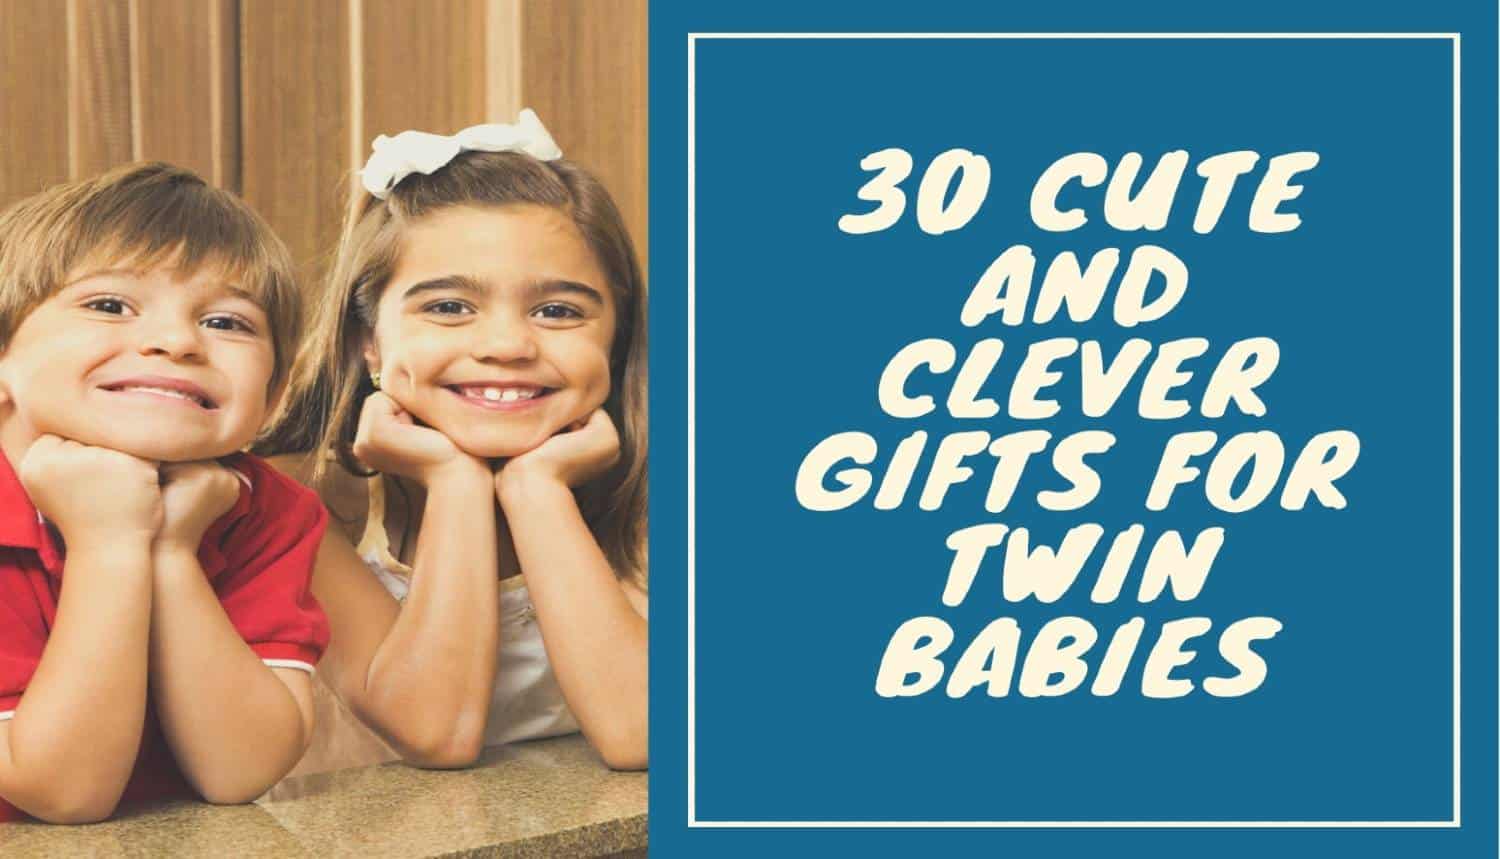 30 Cute and Clever Gifts for Twin Babies 2021